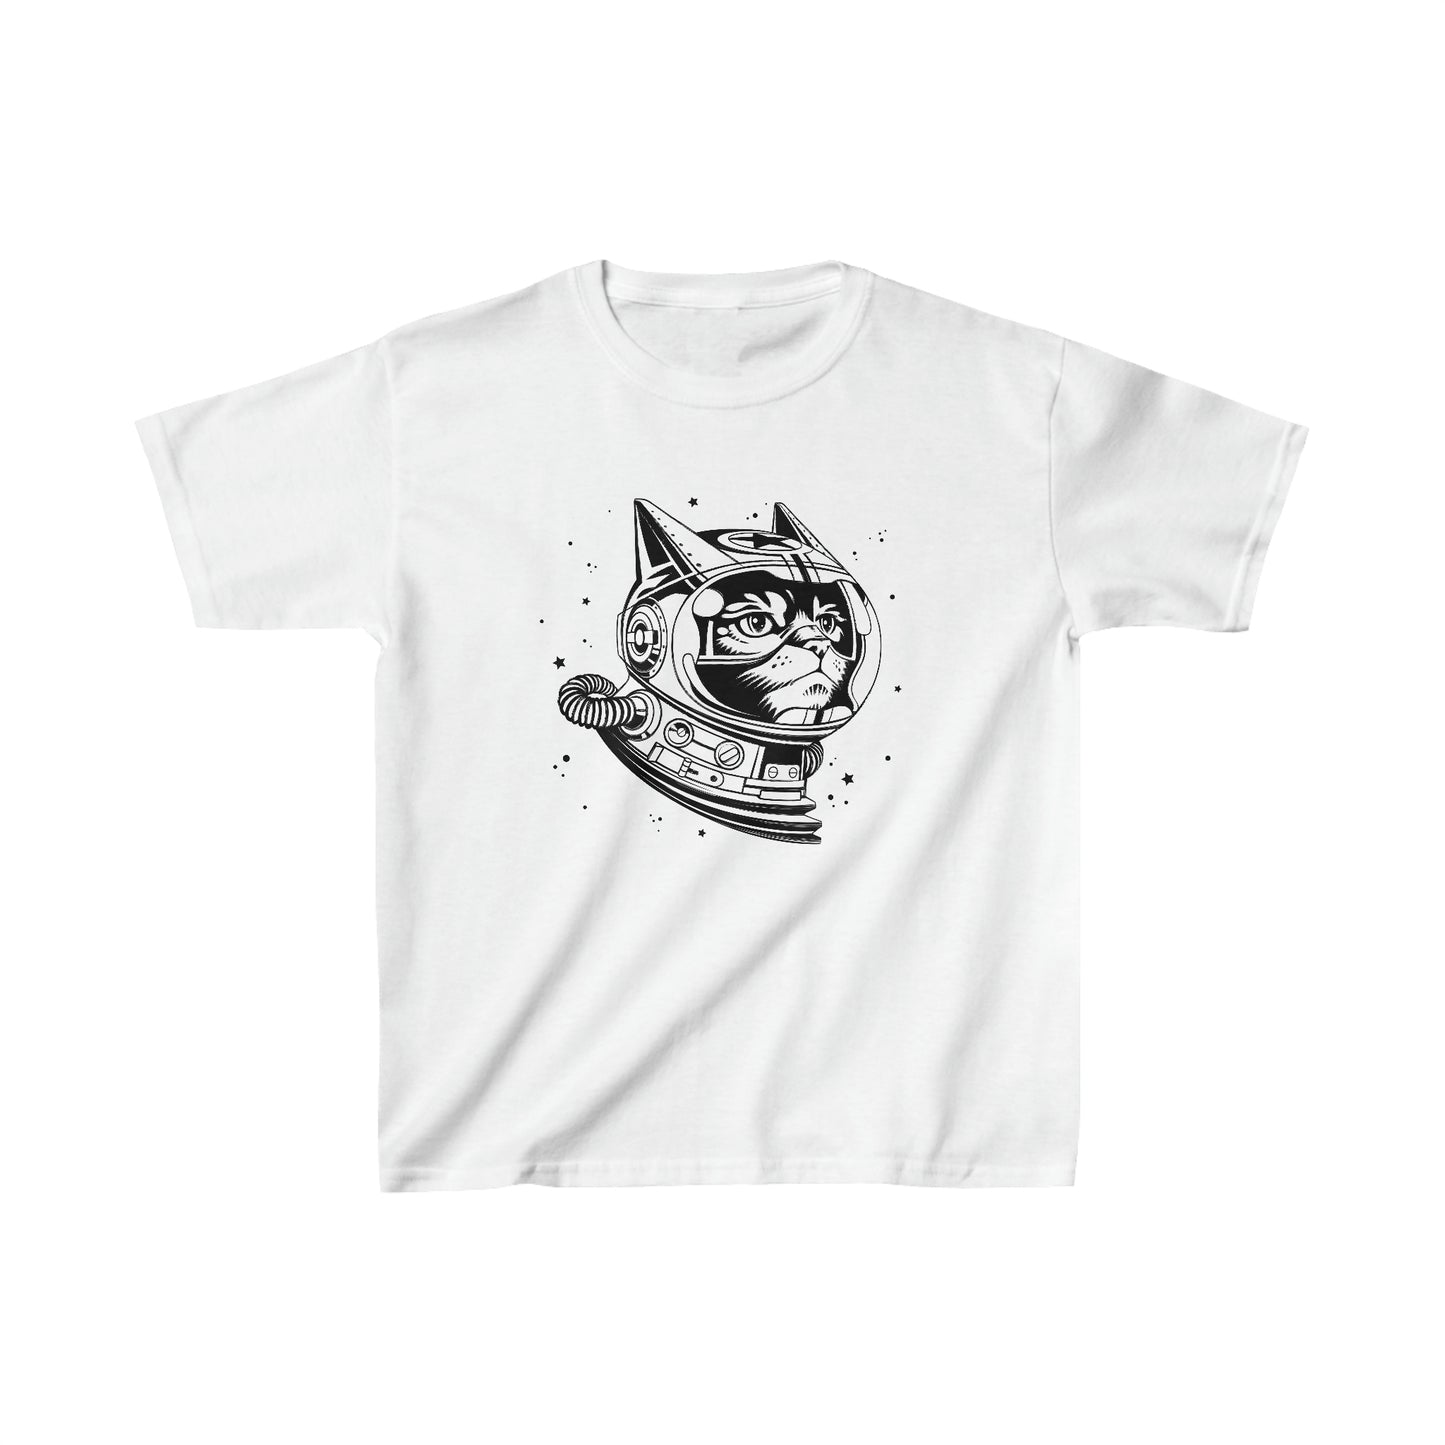 Space Cat Kids Heavy Cotton Graphic Tee